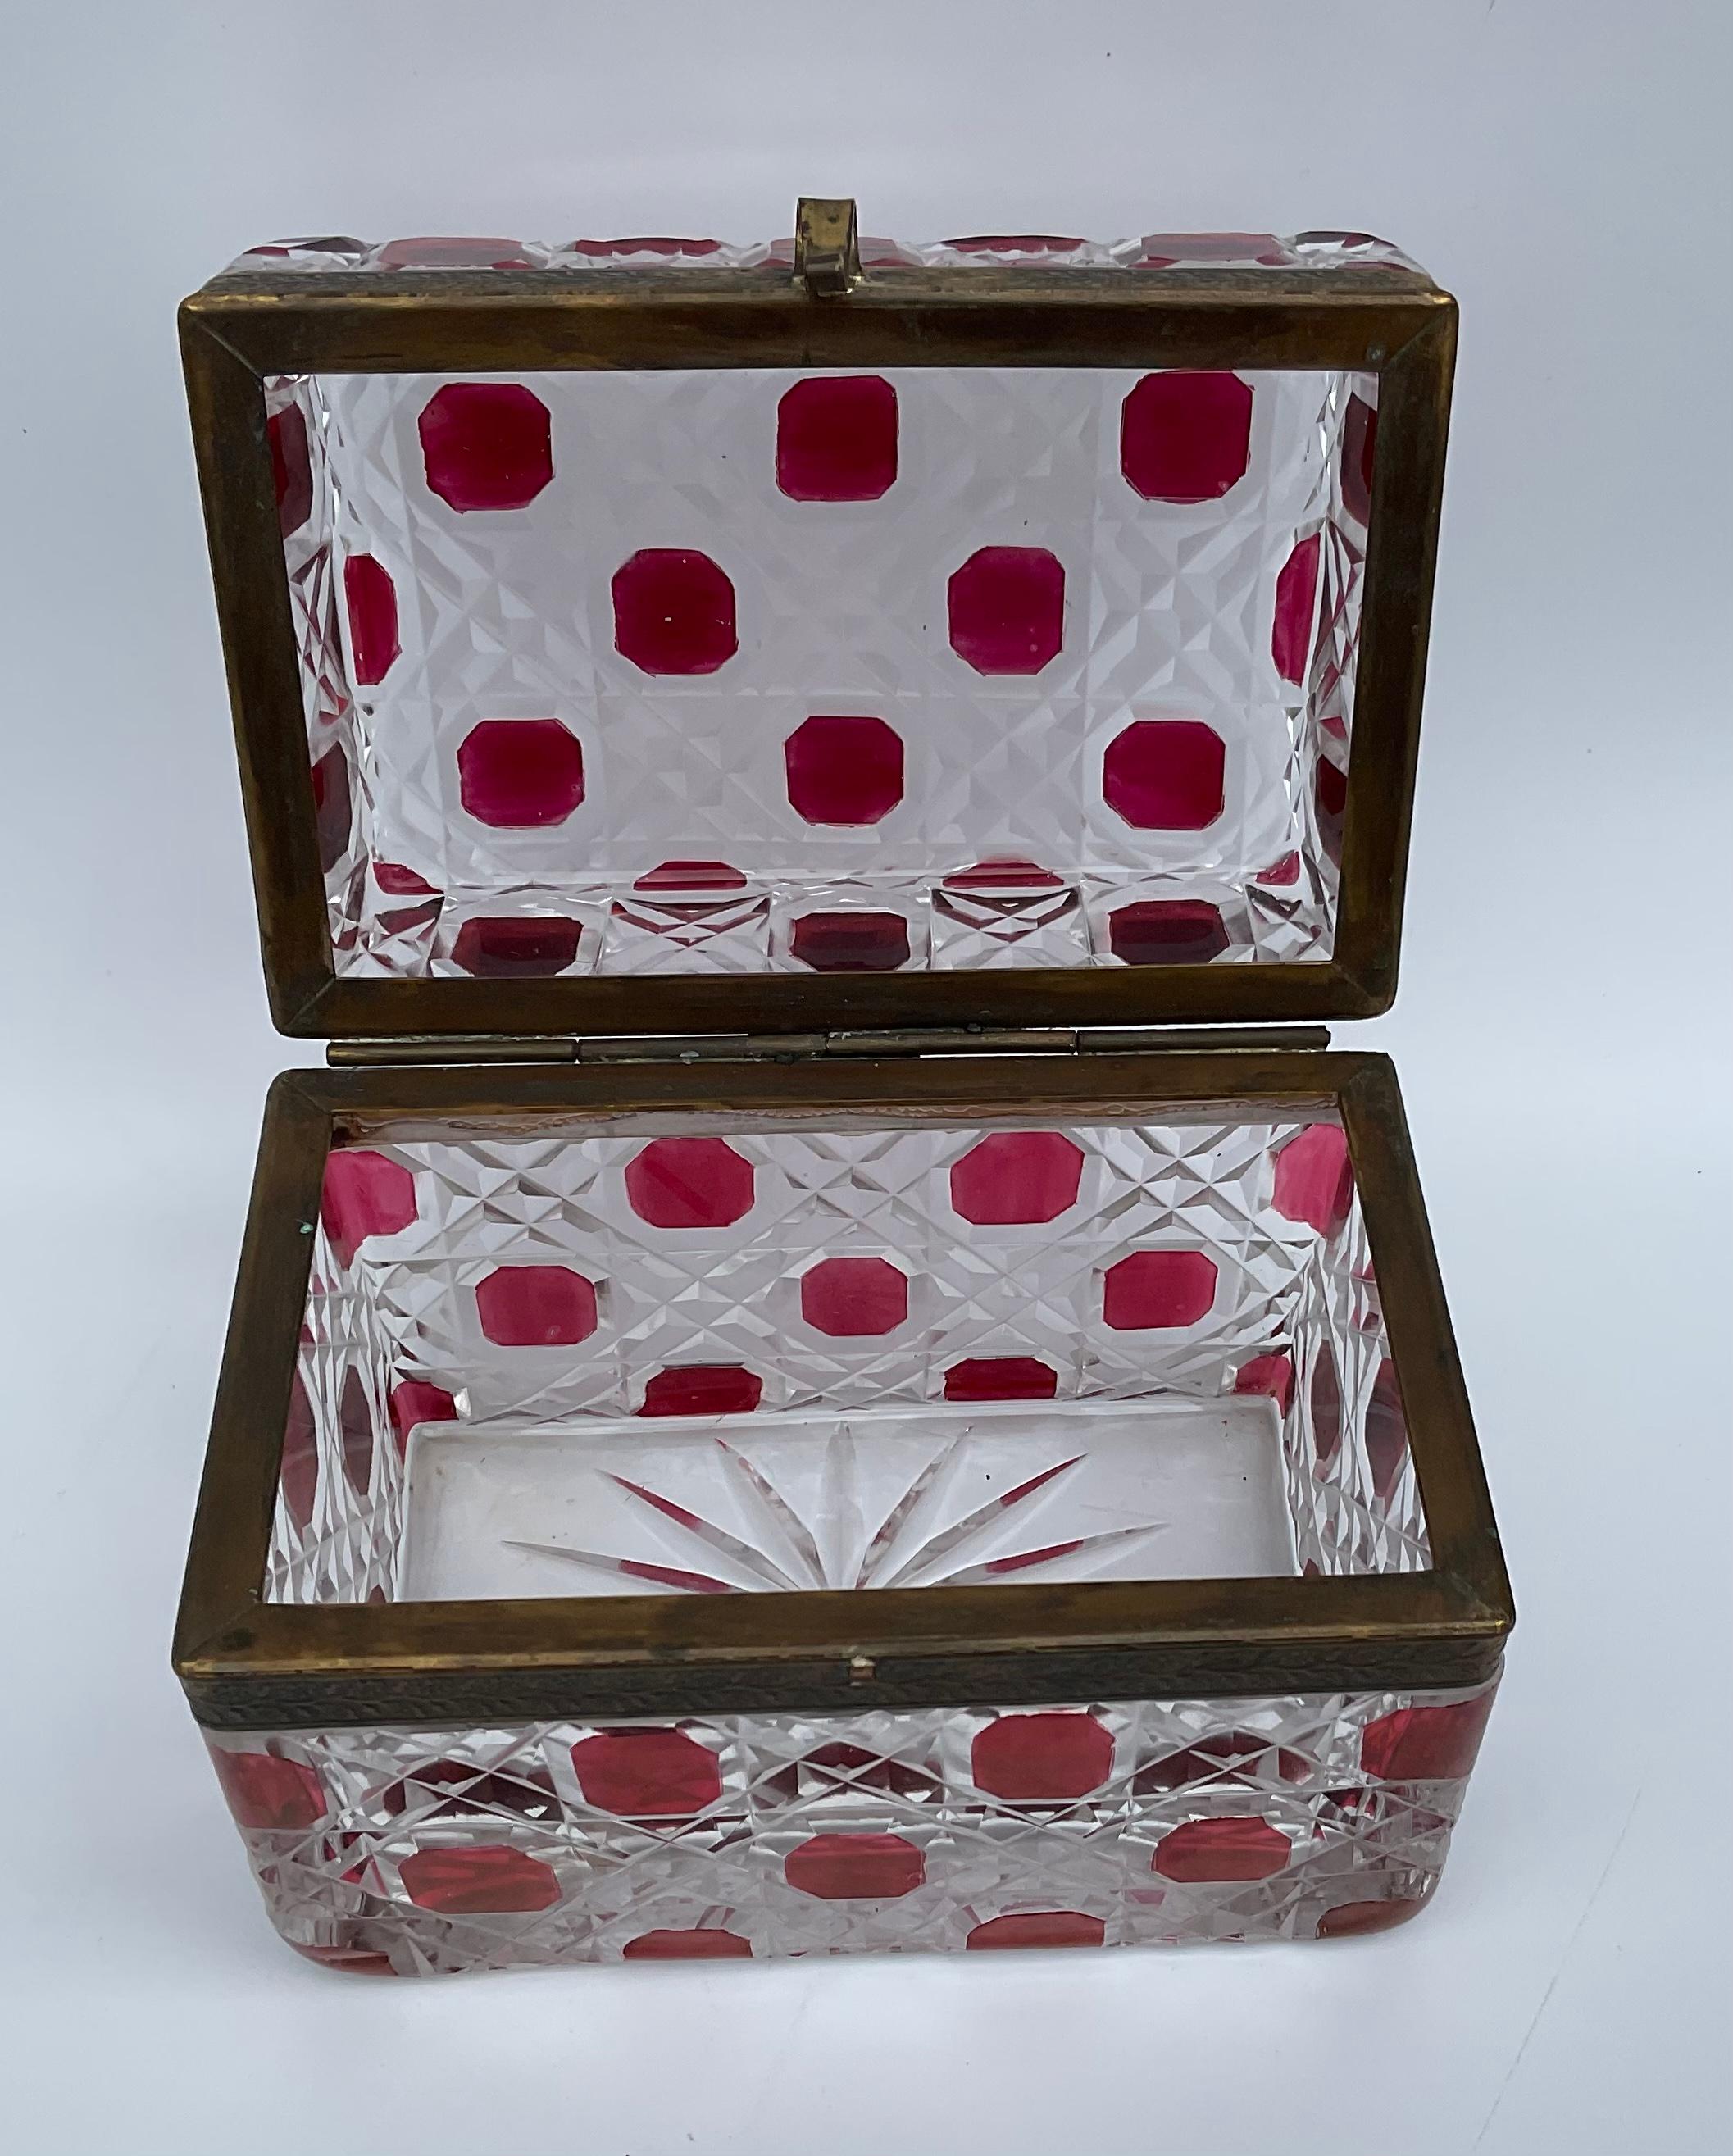 Baccarat French Art Deco Red geometric cut glass decorative box with hinged lid. This piece glistens as the glass quality is extremely high. Do not miss this amazing box.